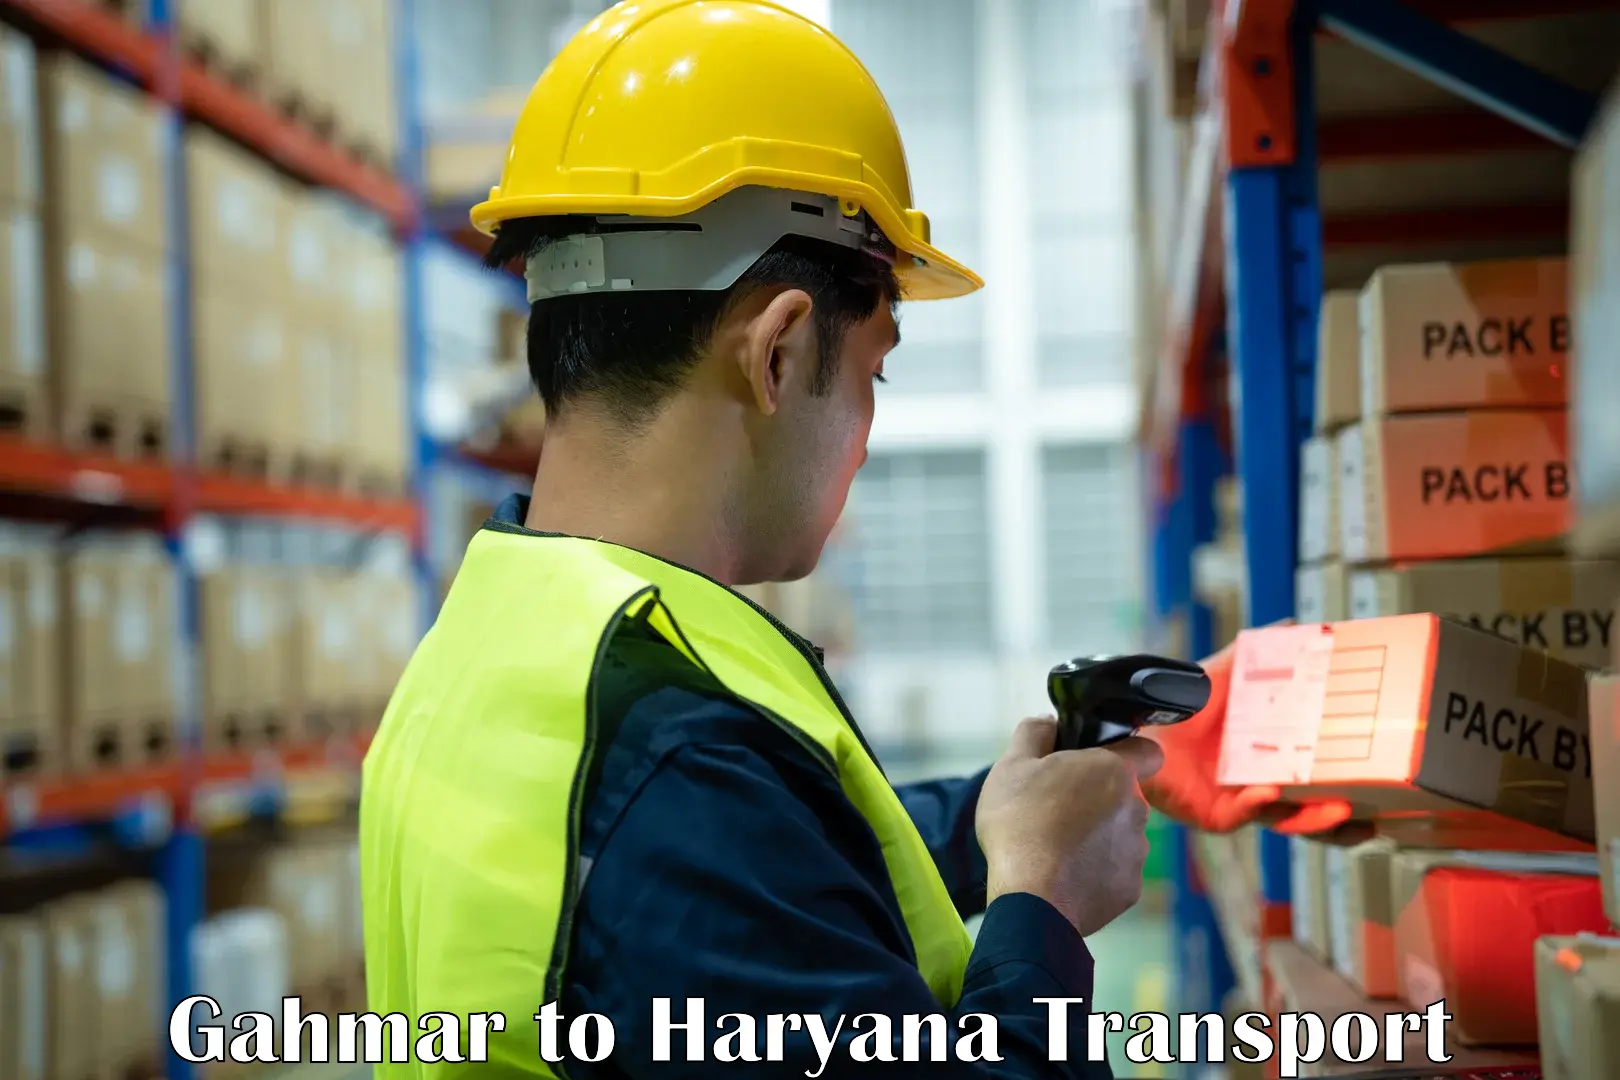 Truck transport companies in India Gahmar to Pinjore